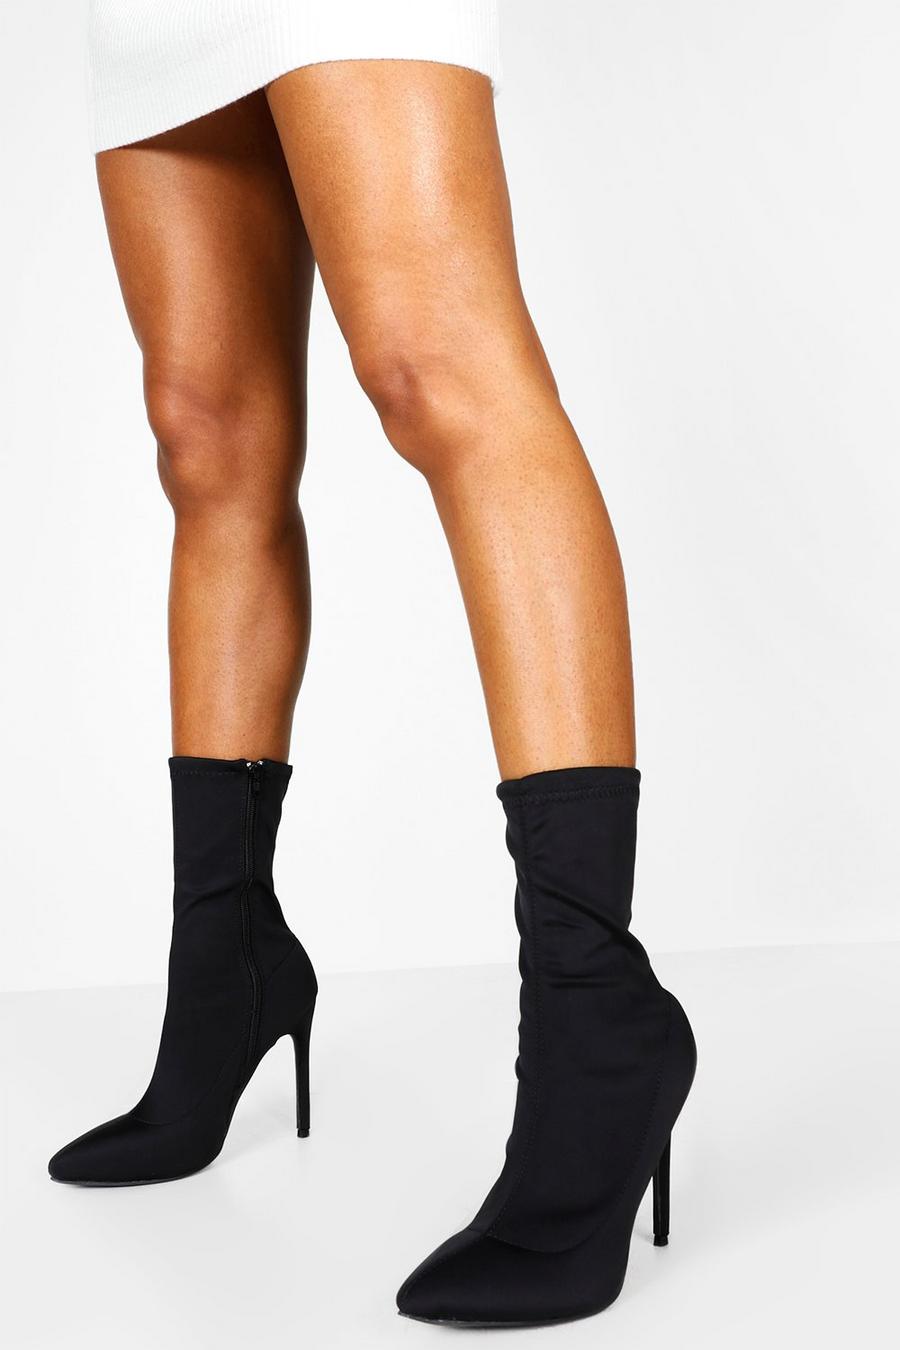 Black Pointed Toe Stiletto Heel Sock Boots image number 1